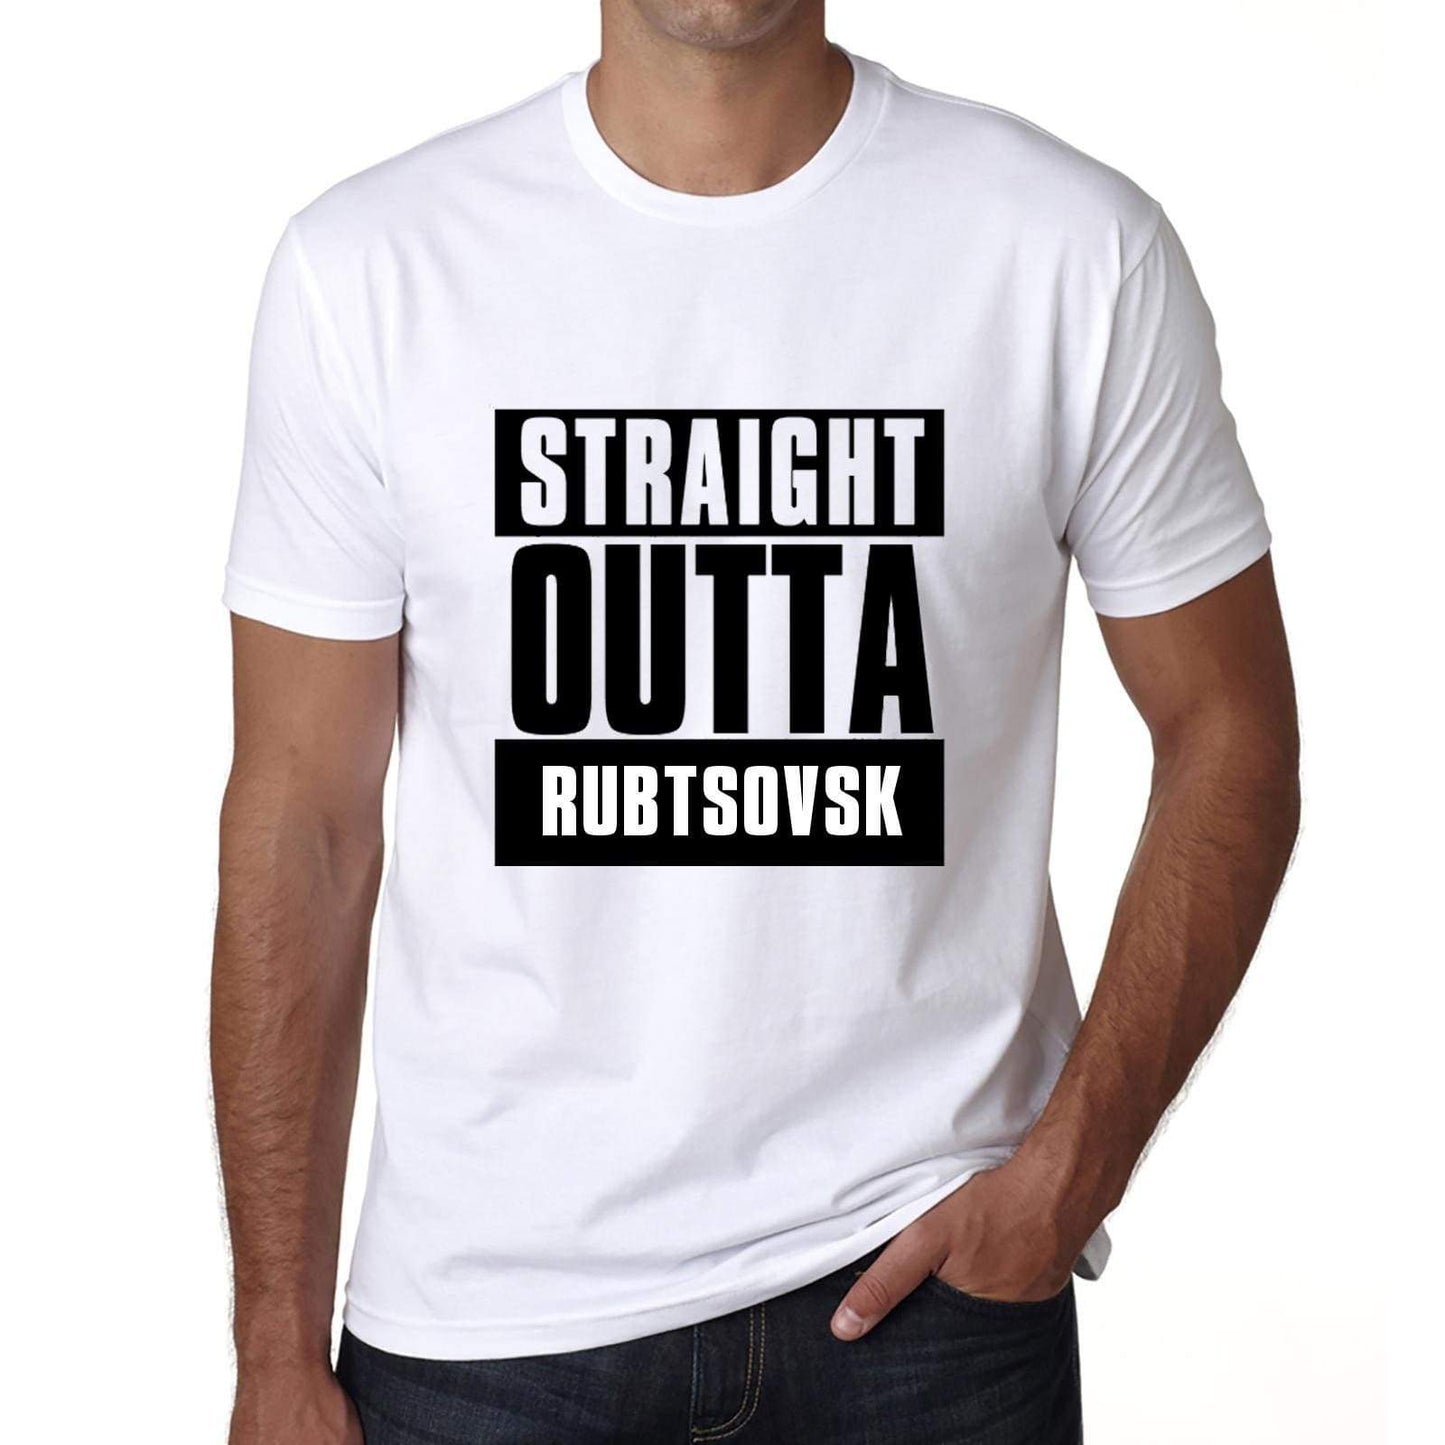 Straight Outta Rubtsovsk Mens Short Sleeve Round Neck T-Shirt 00027 - White / S - Casual